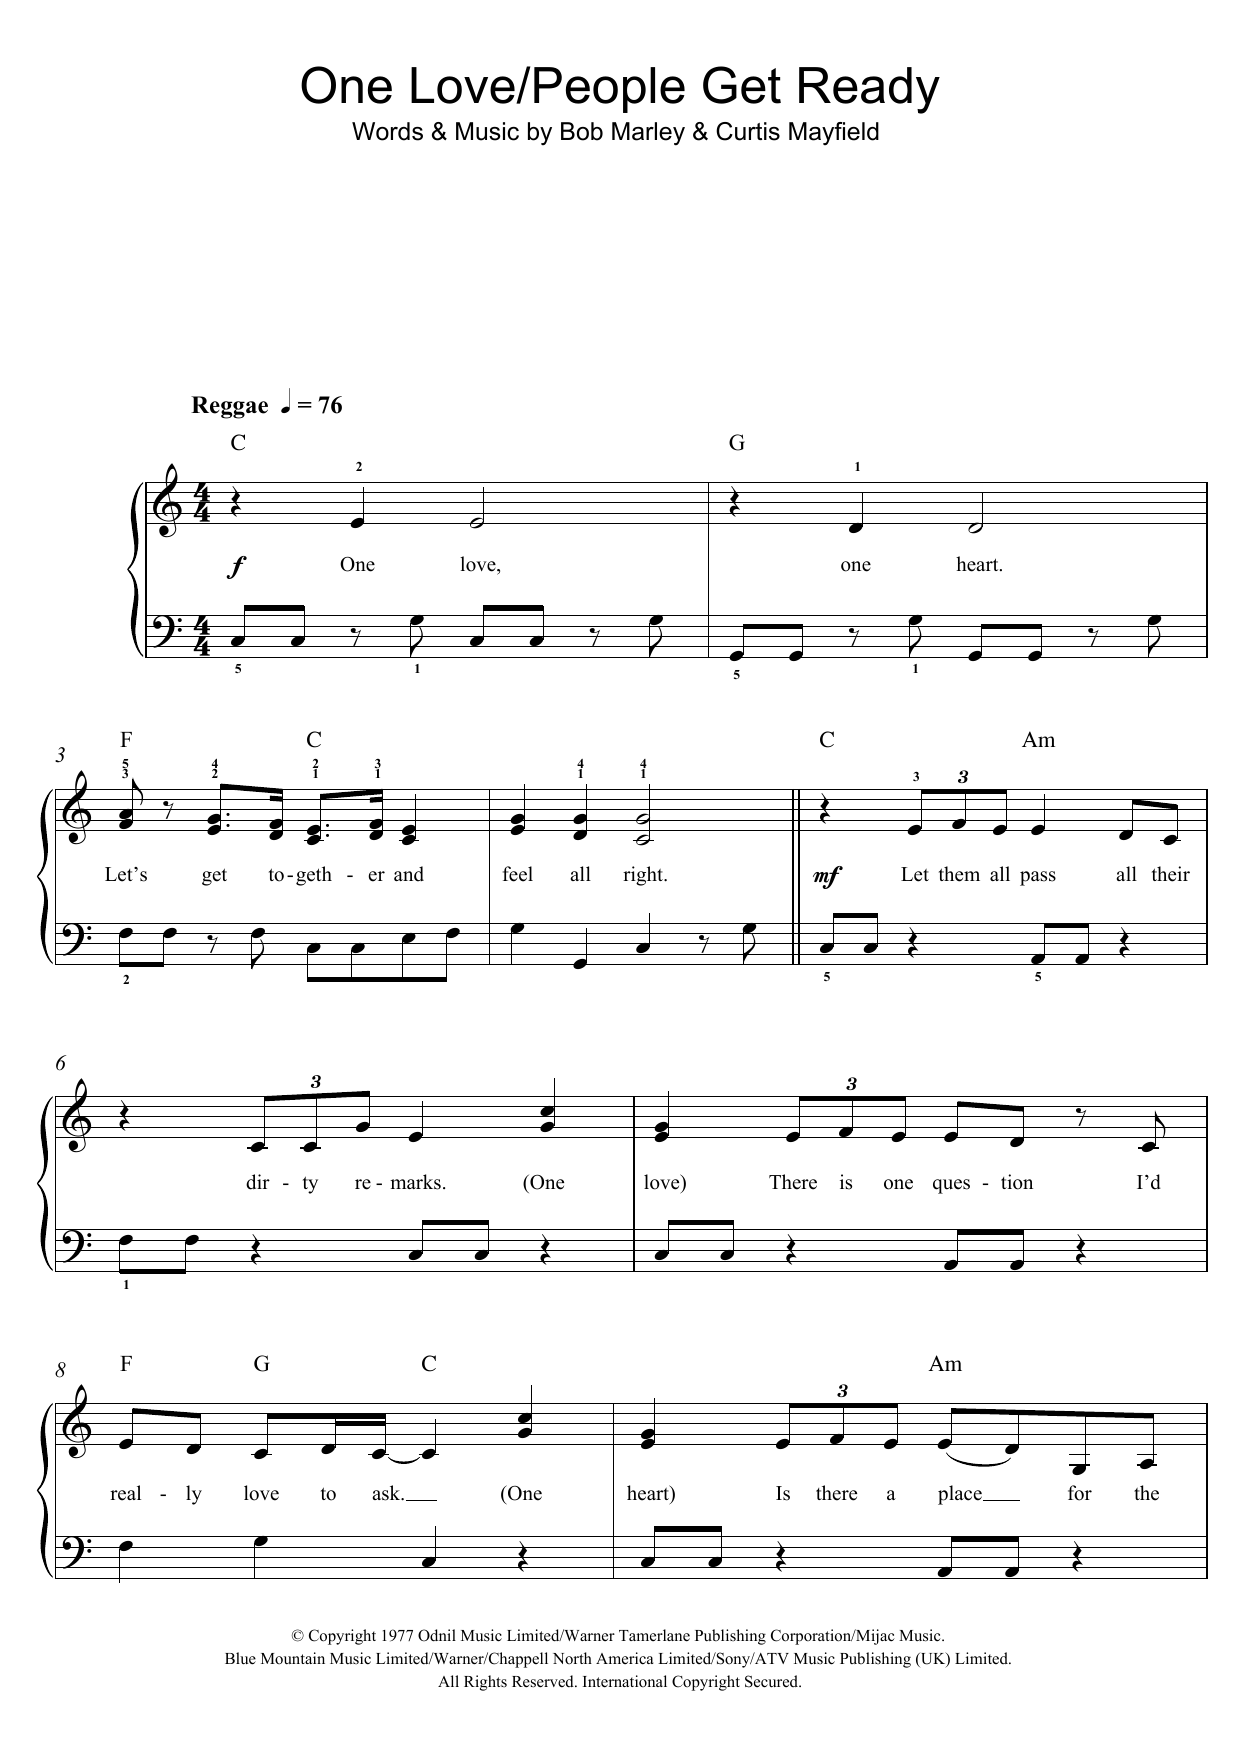 Download Bob Marley One Love/People Get Ready Sheet Music